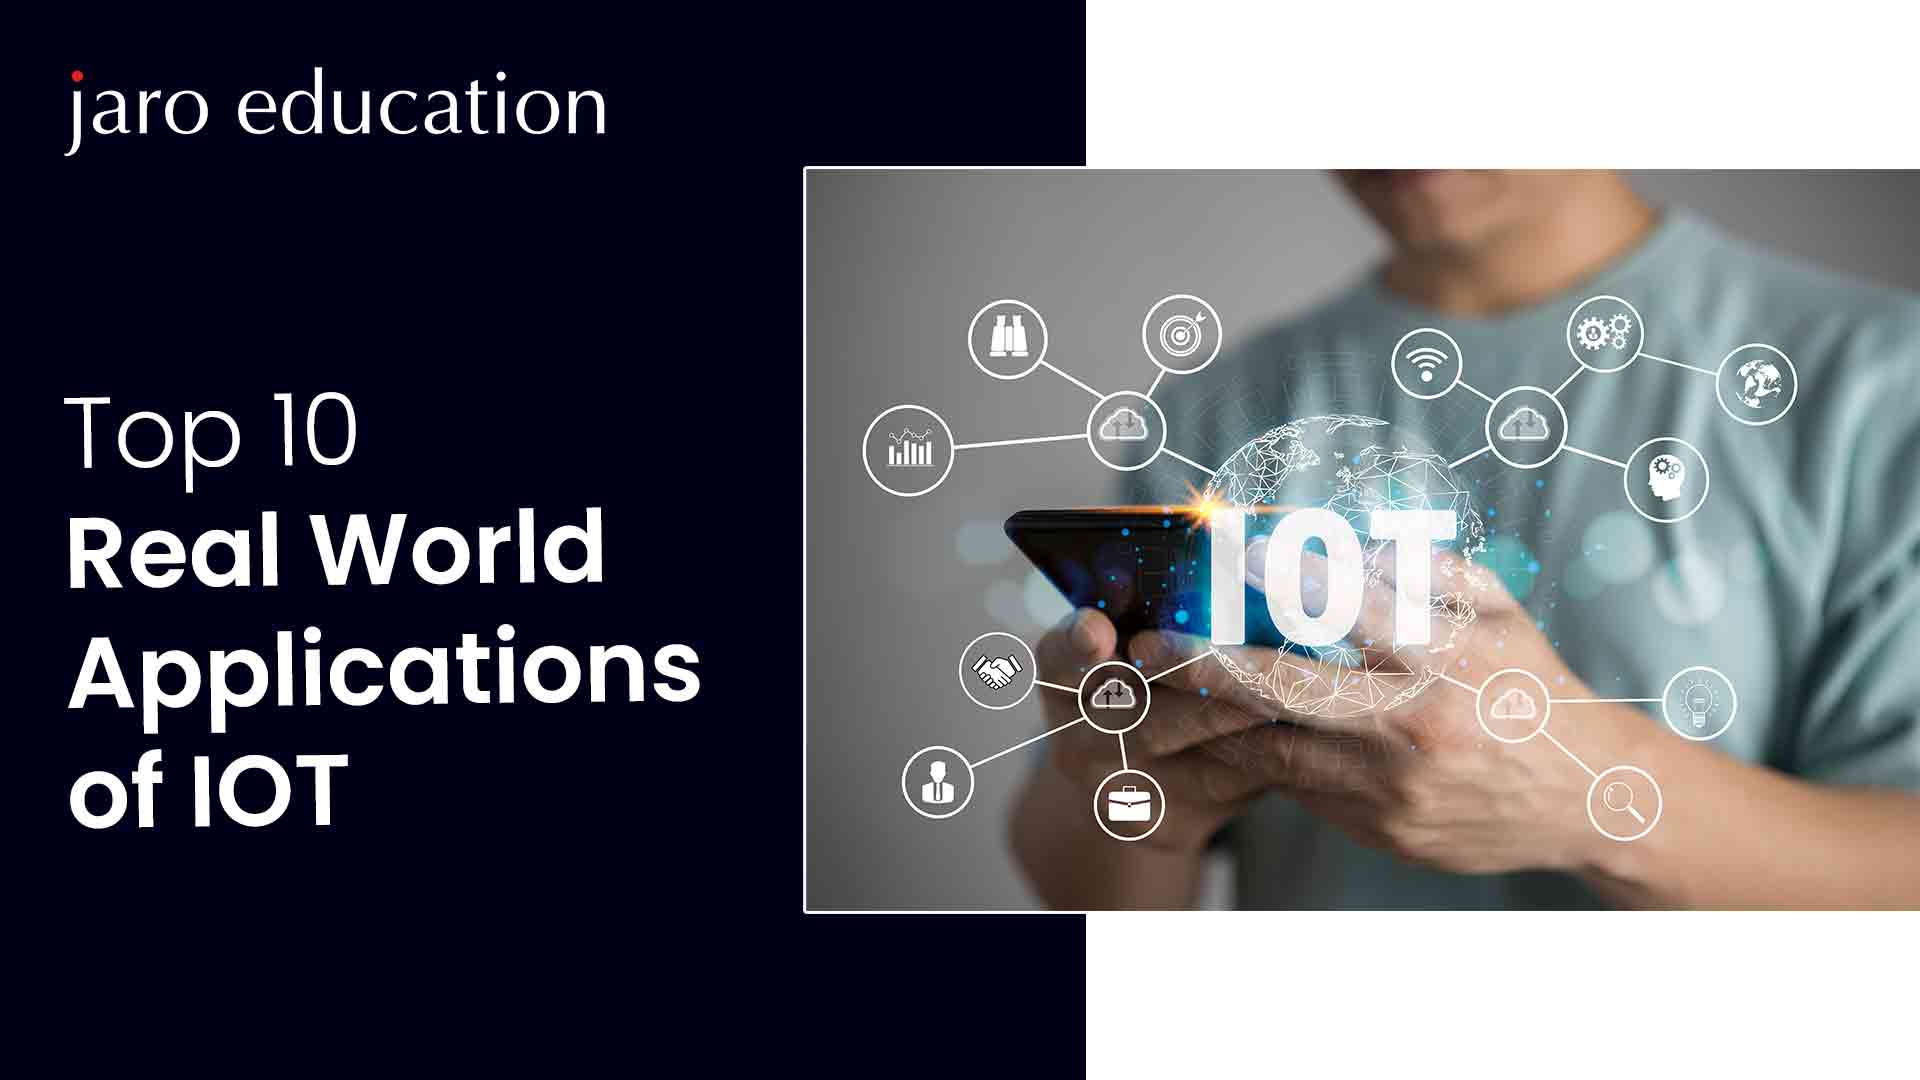 Top 10 Real World Applications of IOT